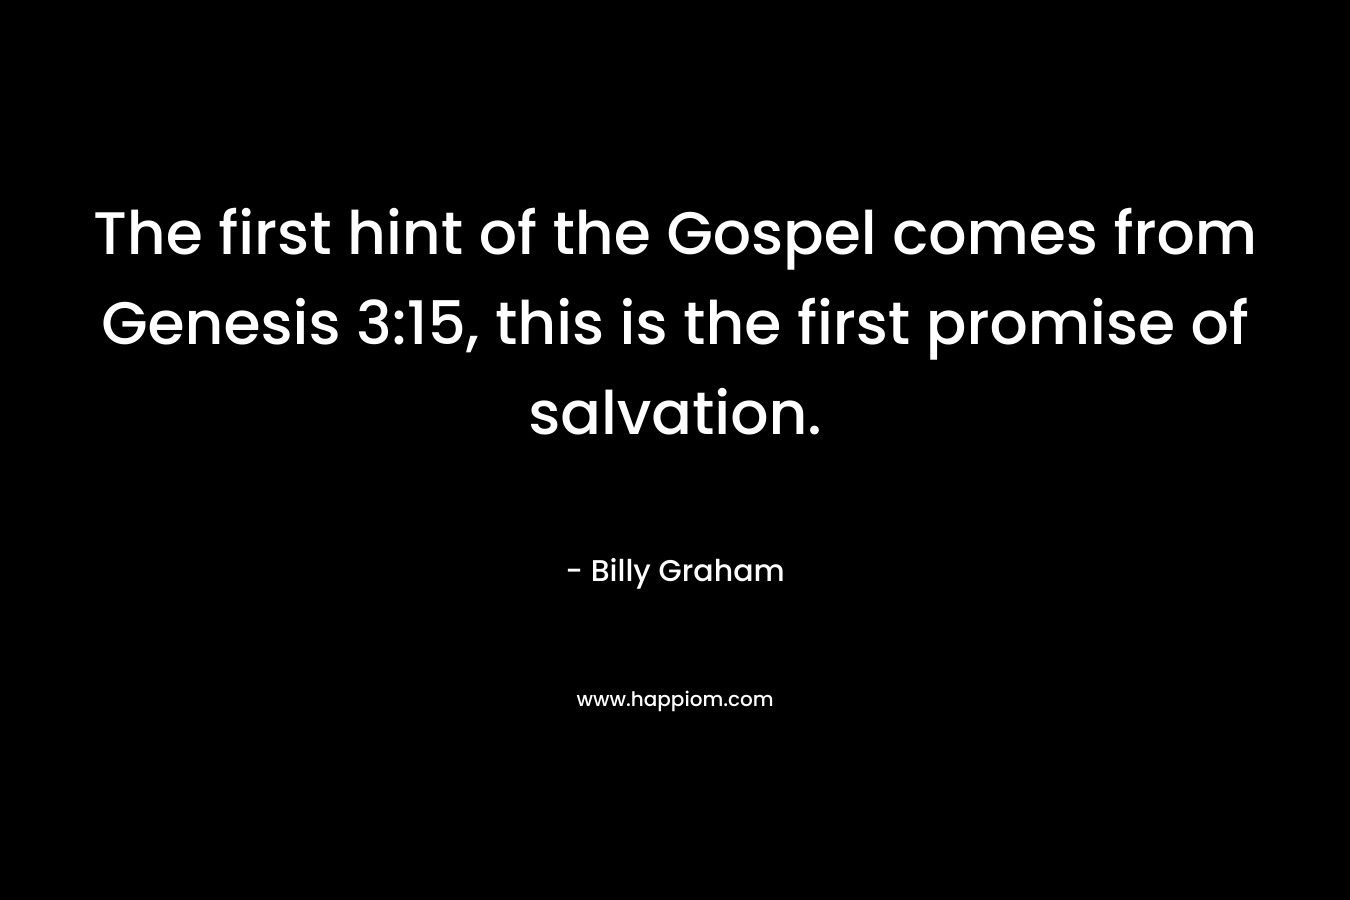 The first hint of the Gospel comes from Genesis 3:15, this is the first promise of salvation.